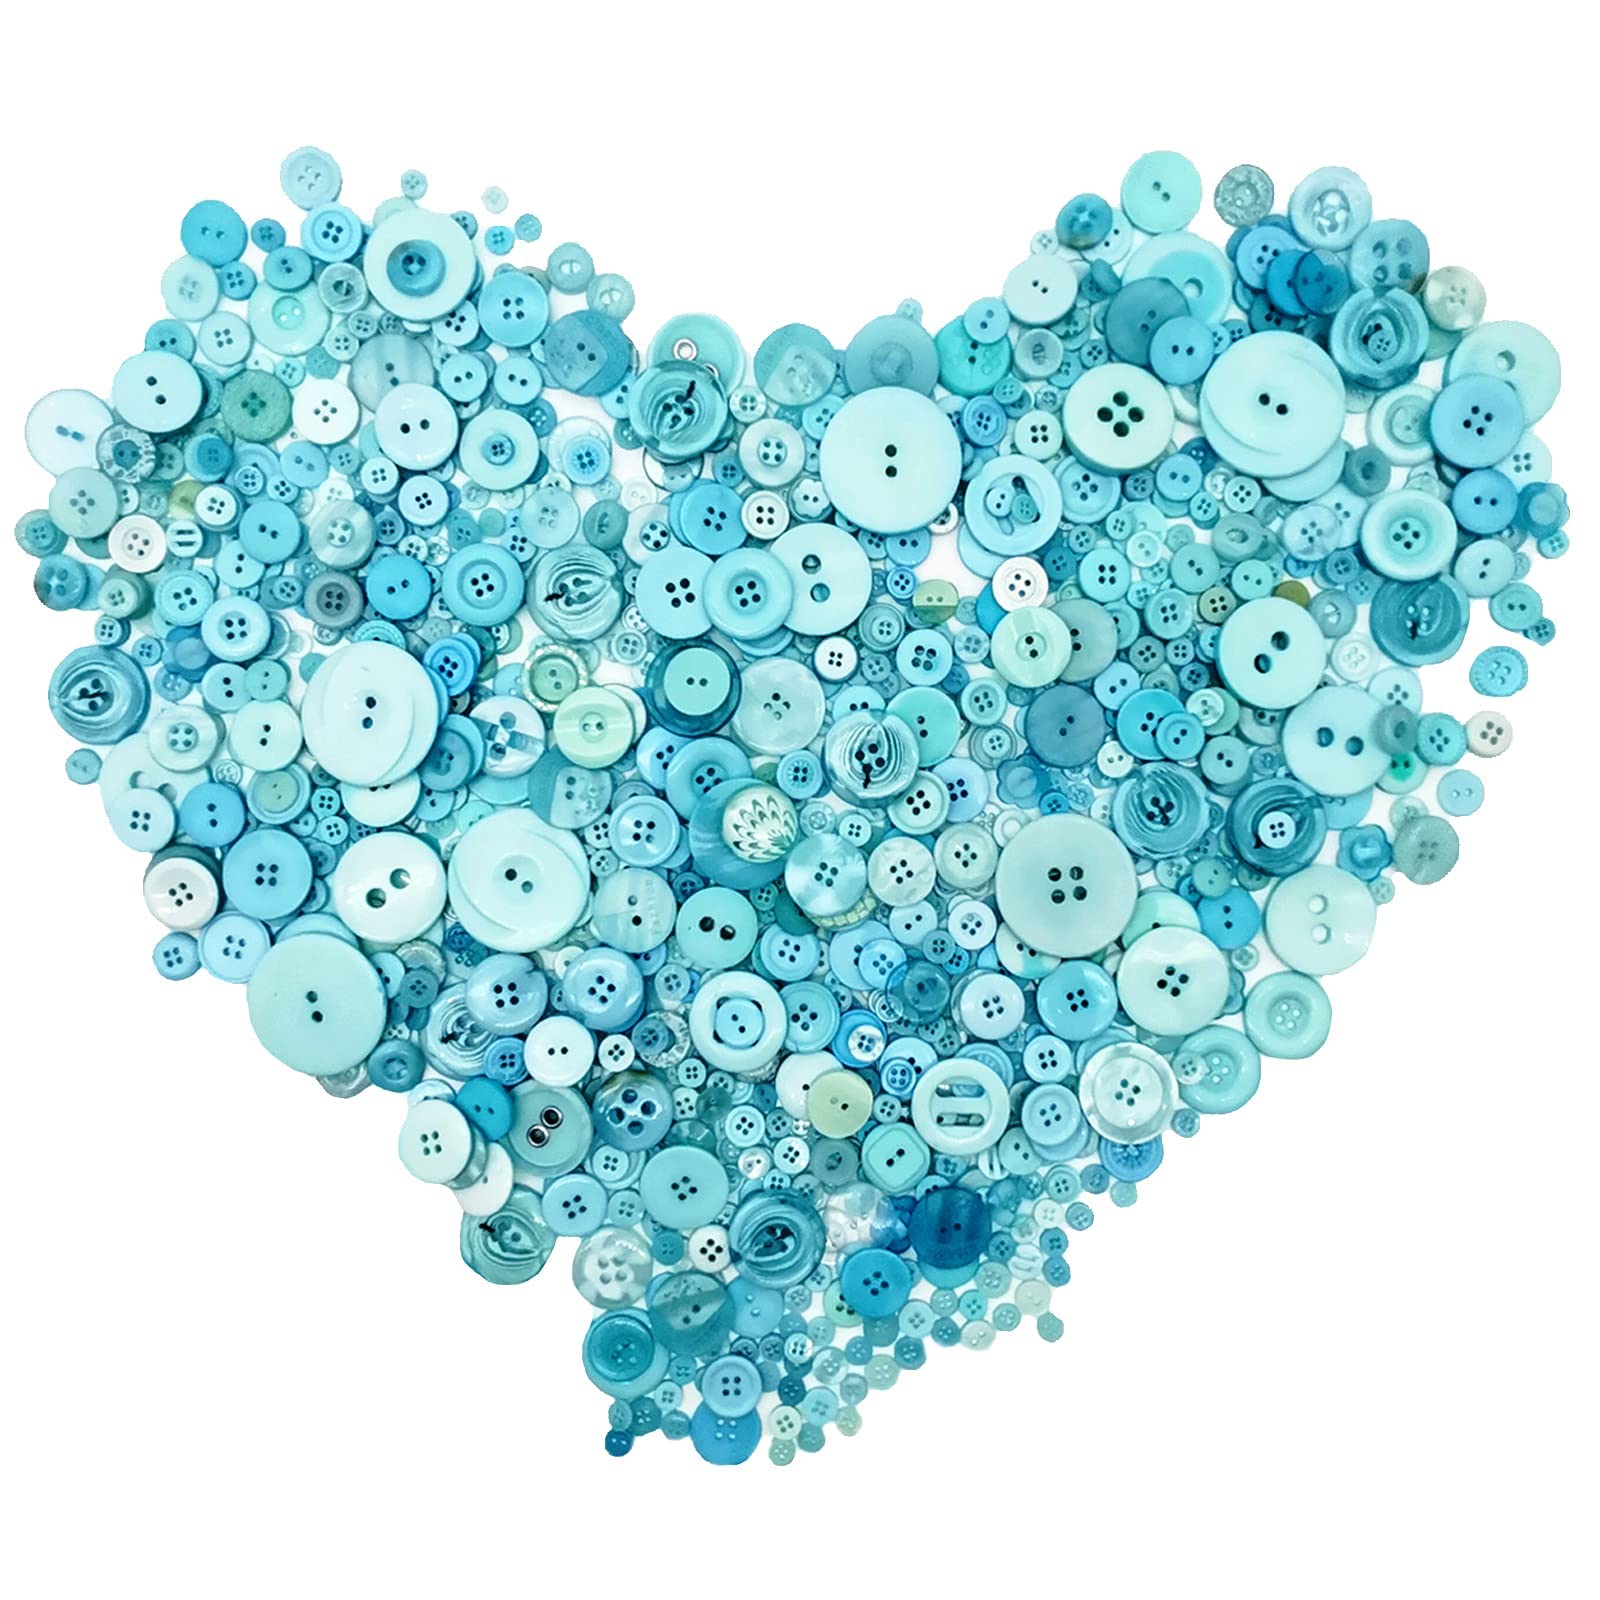 Esoca 650Pcs Turquoise Buttons for Crafts in Bulk Assorted